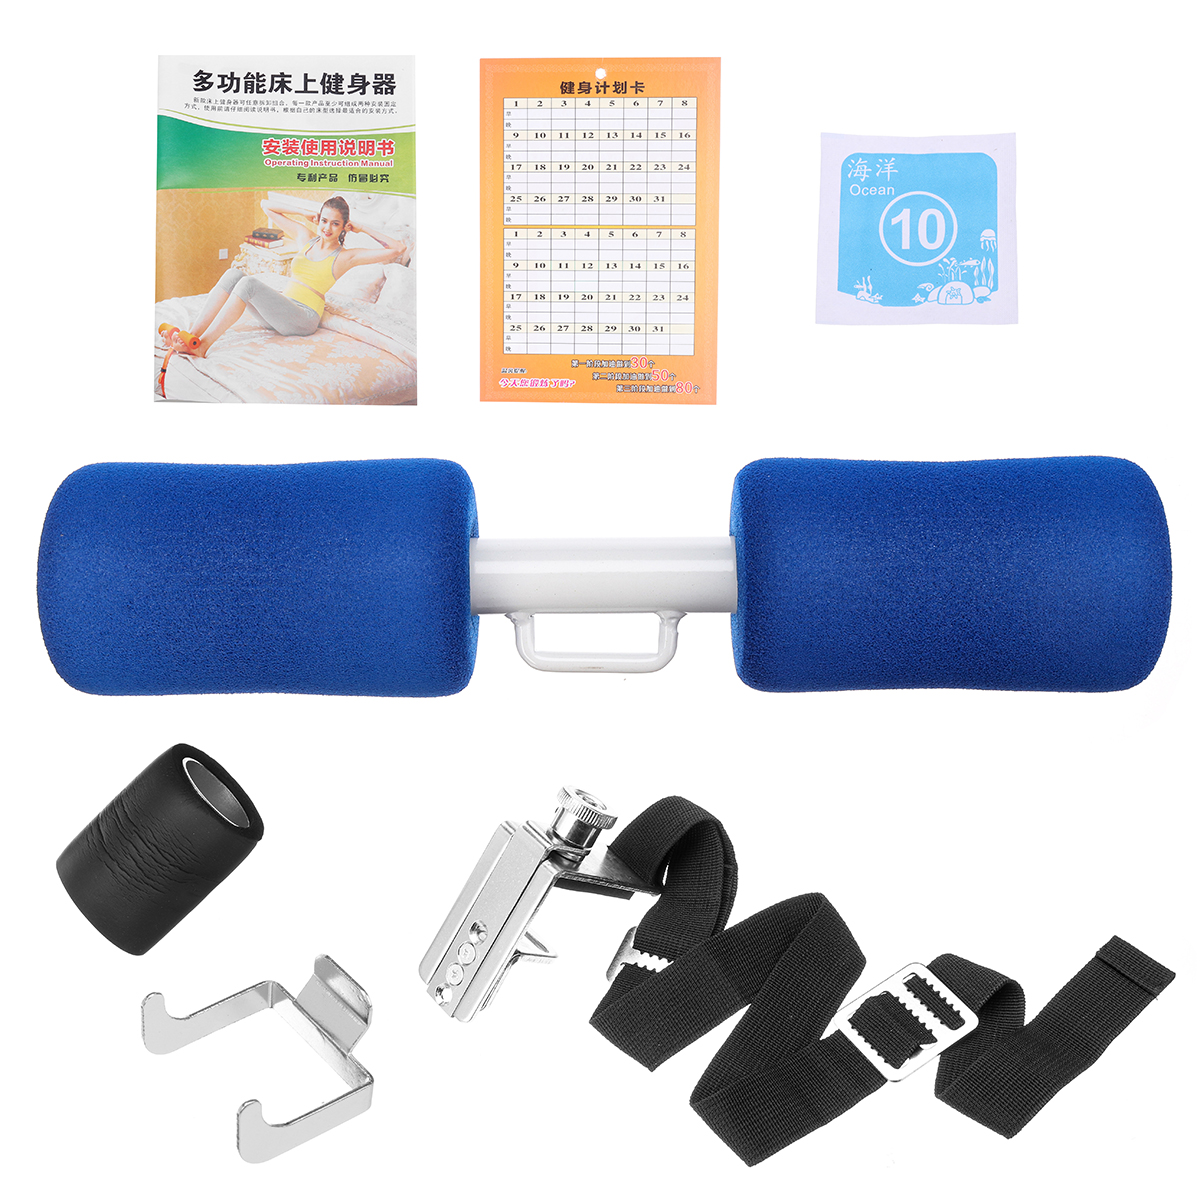 Adjustable-Sit-Ups-Abdominal-Wheel-Roller-Push-up-Home-Fitness-Sports-Exercise-Tools-1663894-8